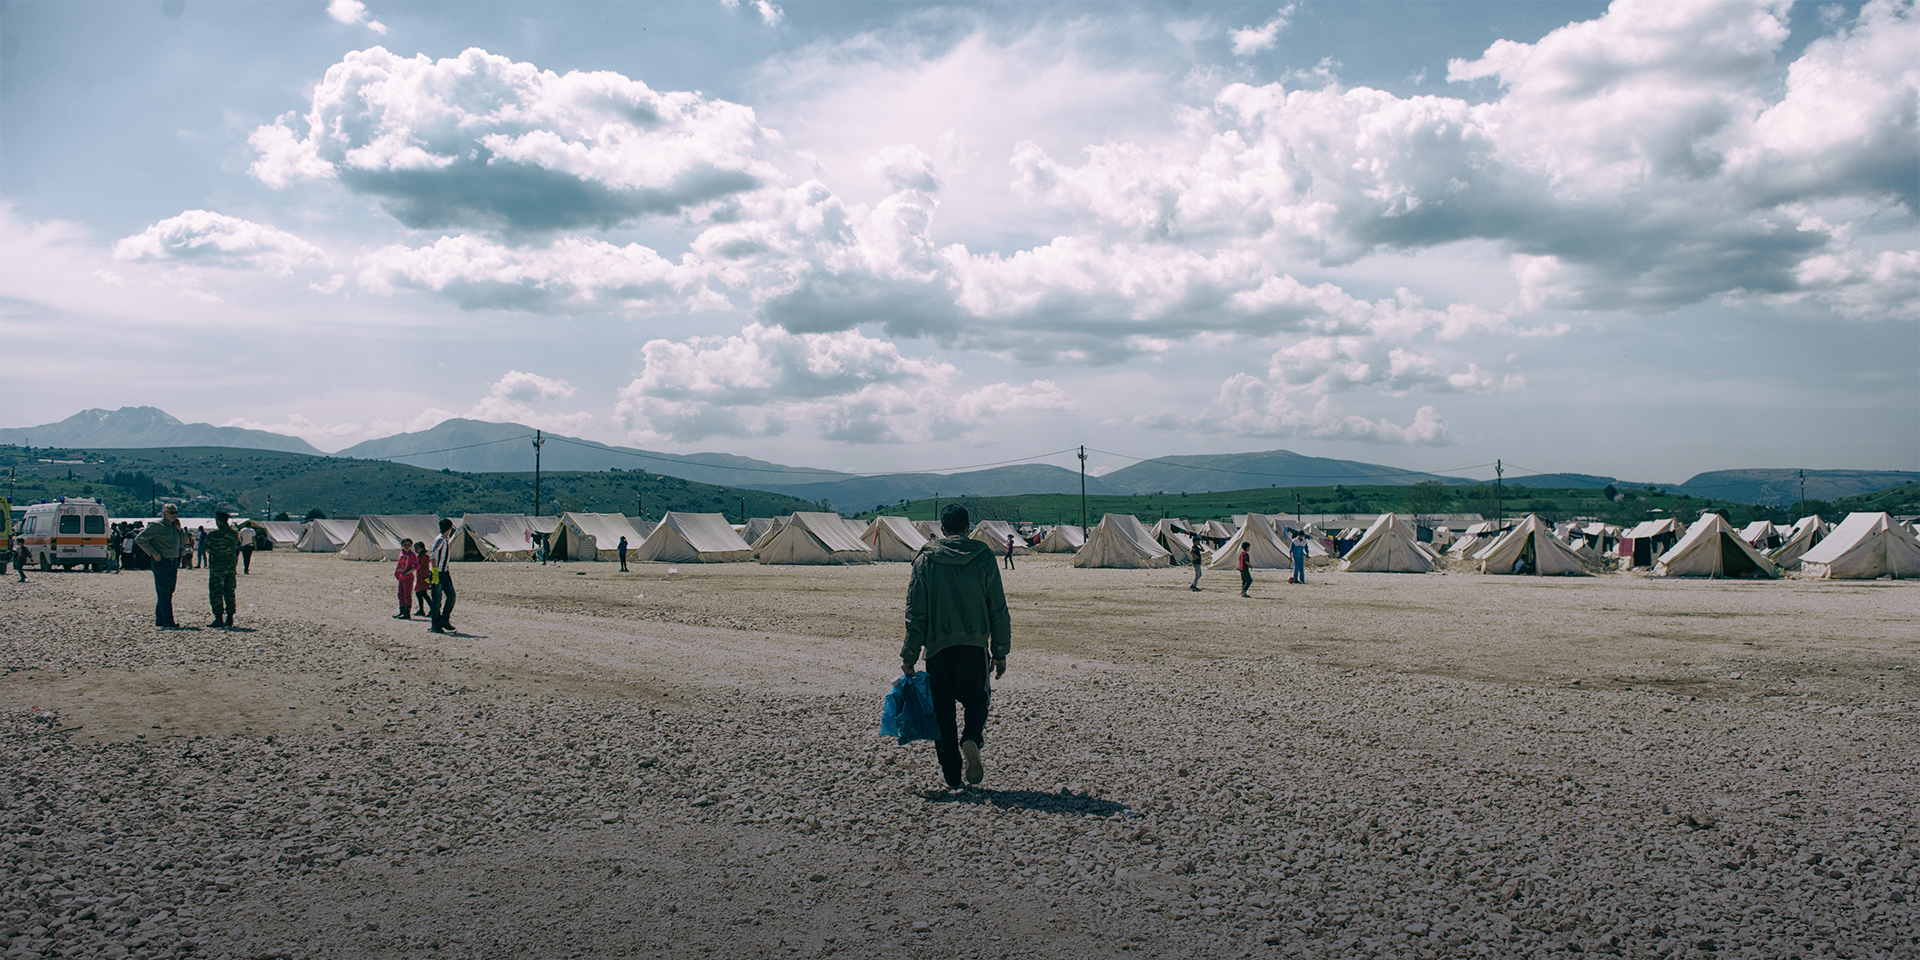 A man walking toward a large group of white tents in the background.